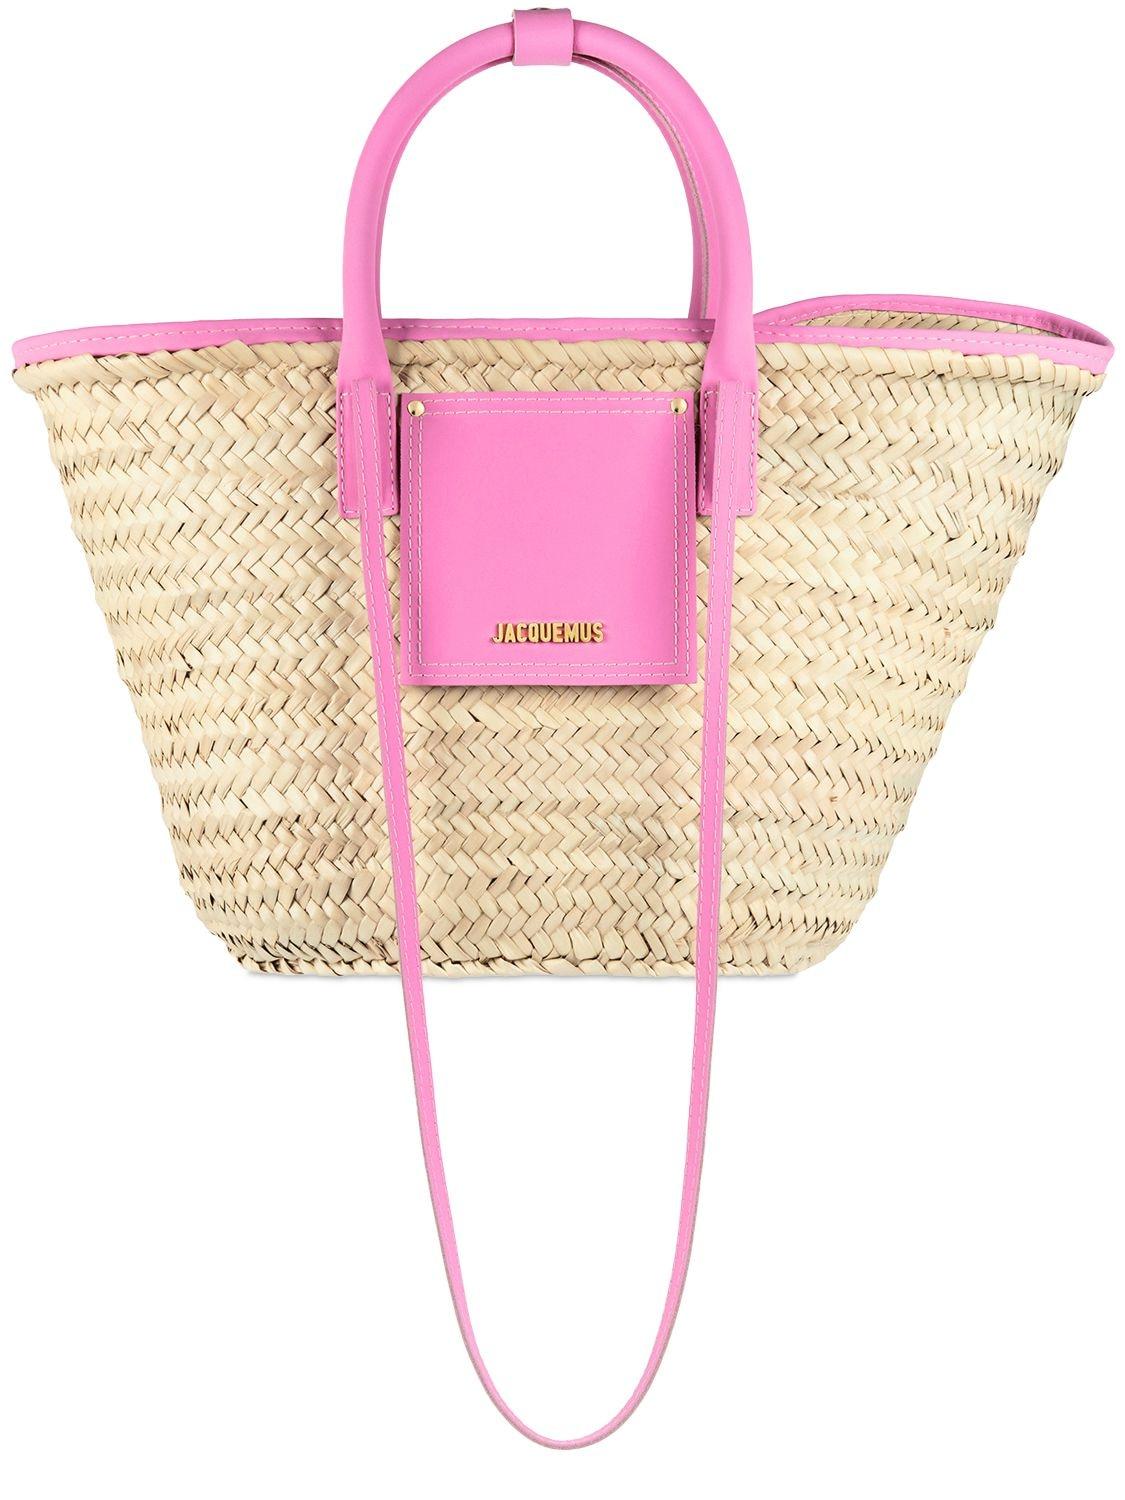 Jacquemus Le Panier Soli Straw & Leather Bag in Light Pink (Pink) | Lyst